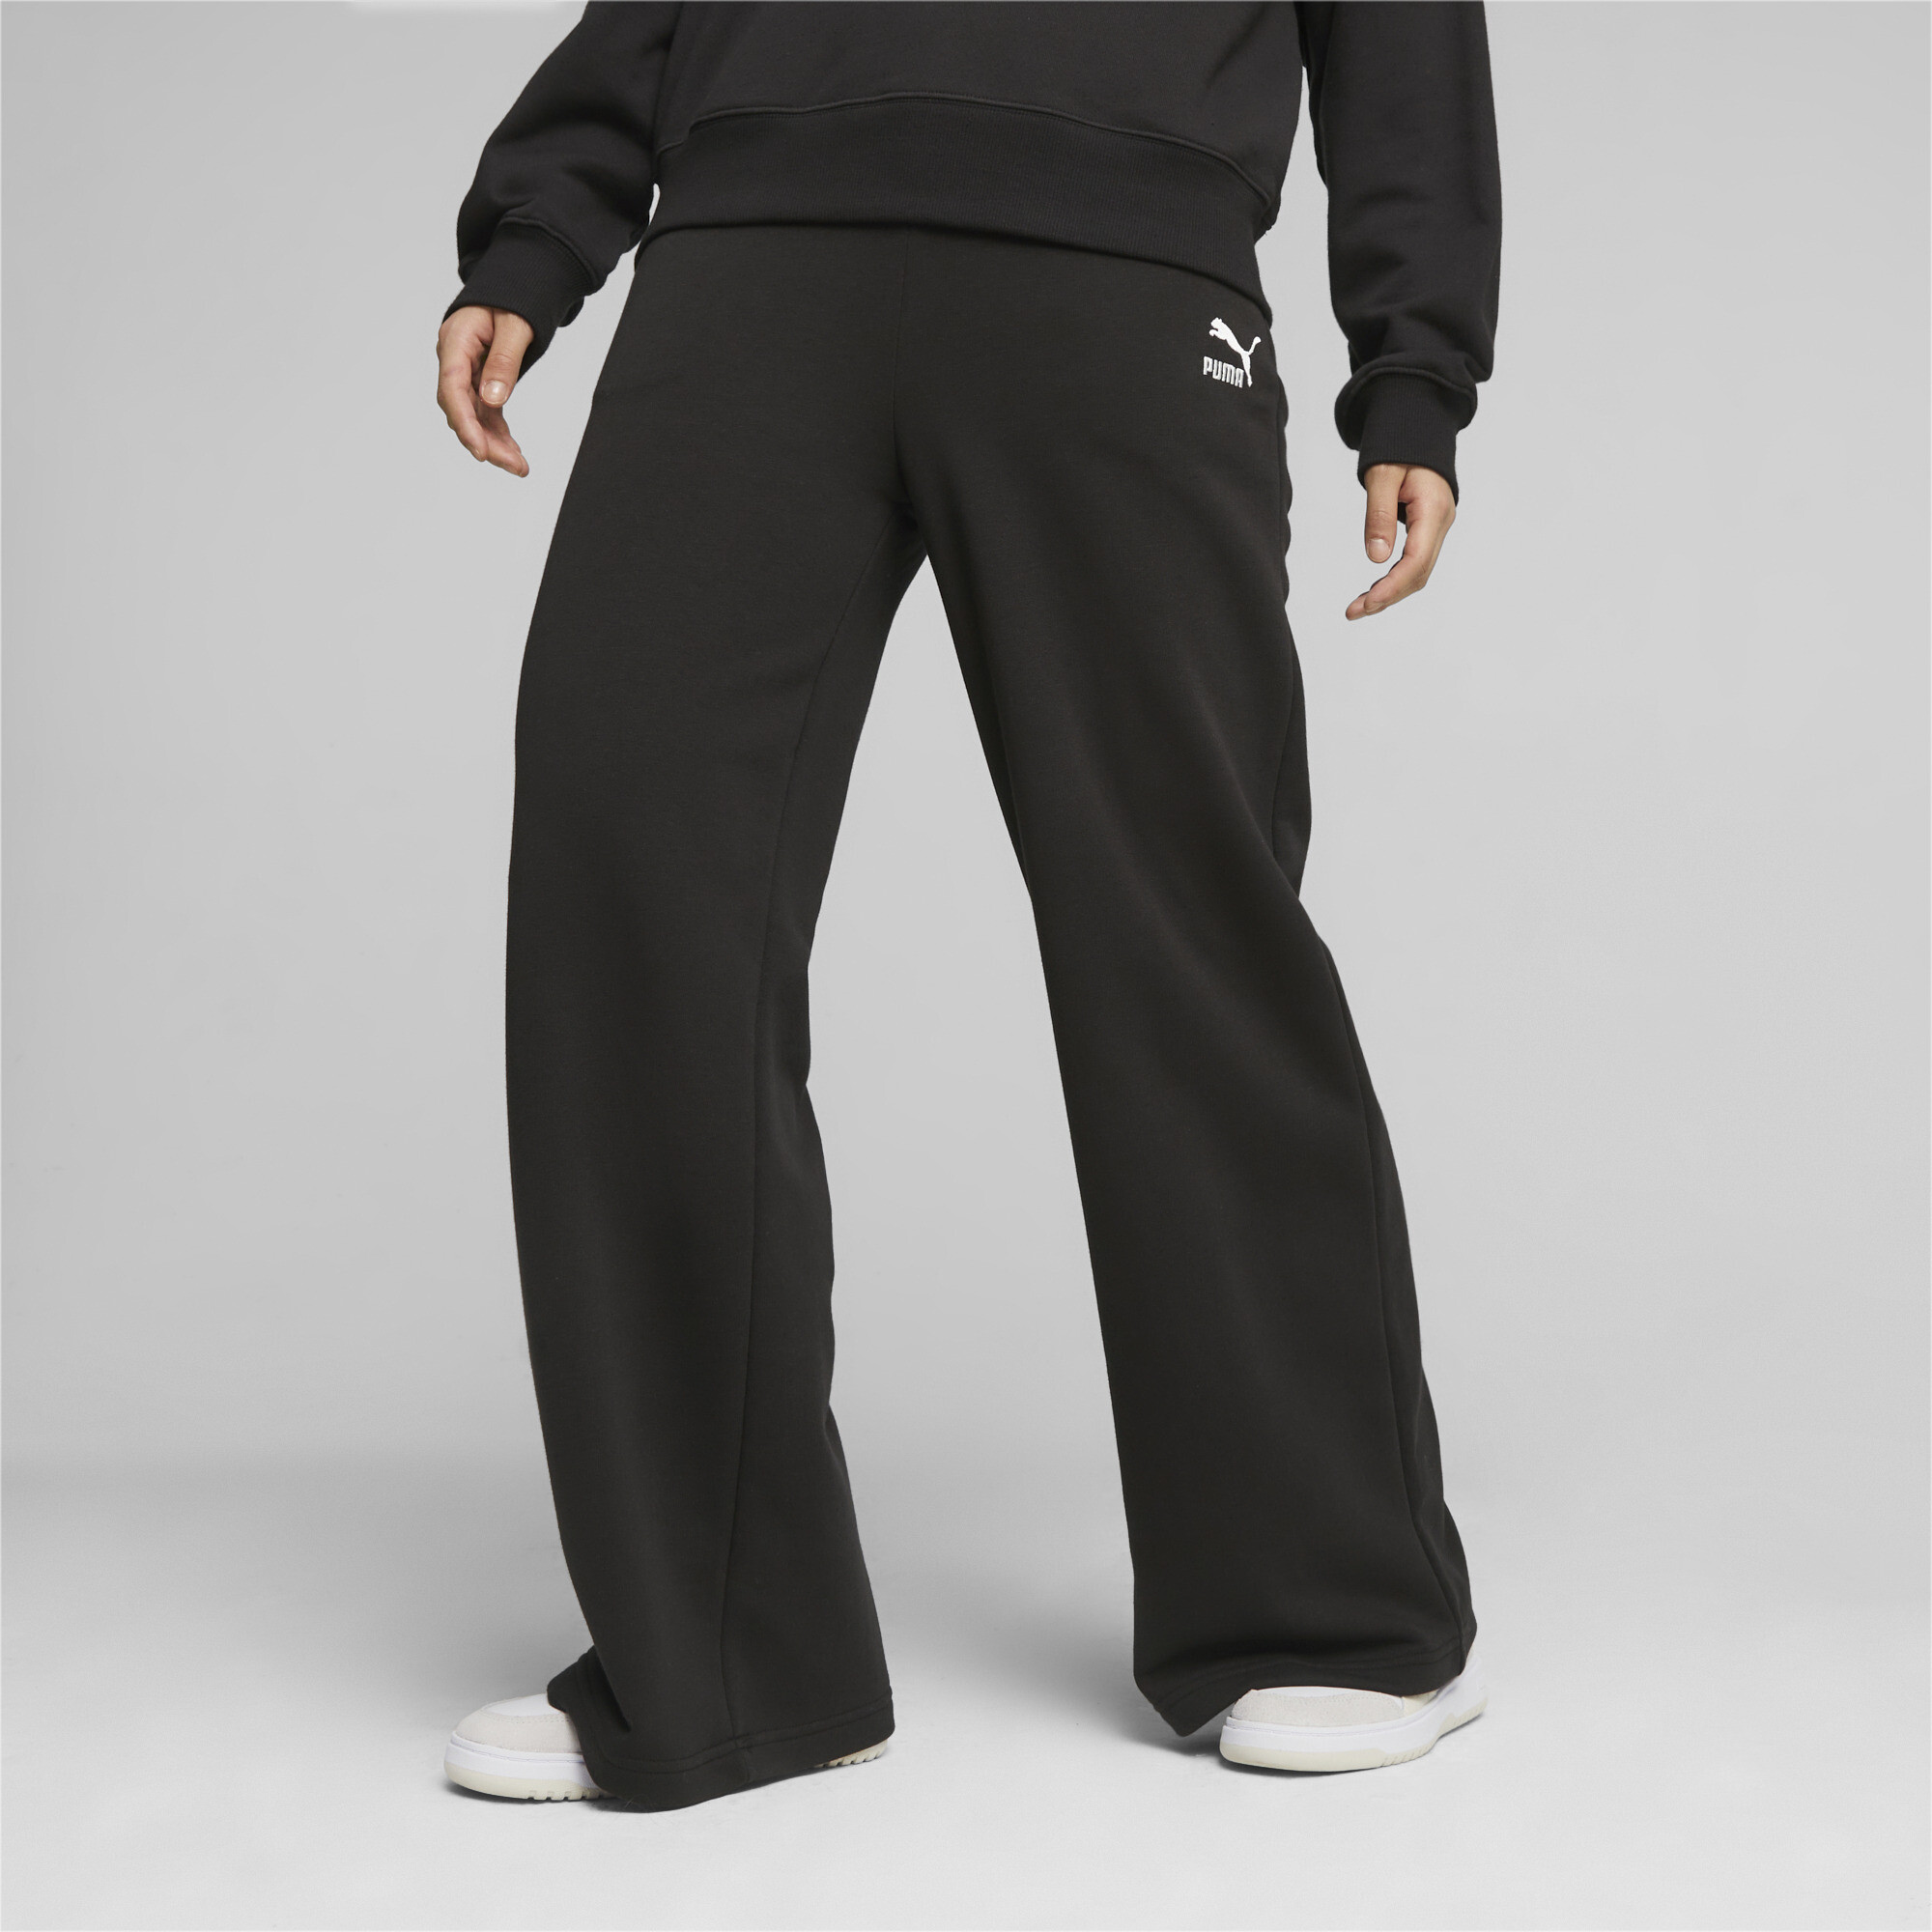 Women's PUMA CLASSICS Relaxed Sweatpants In Black, Size Large